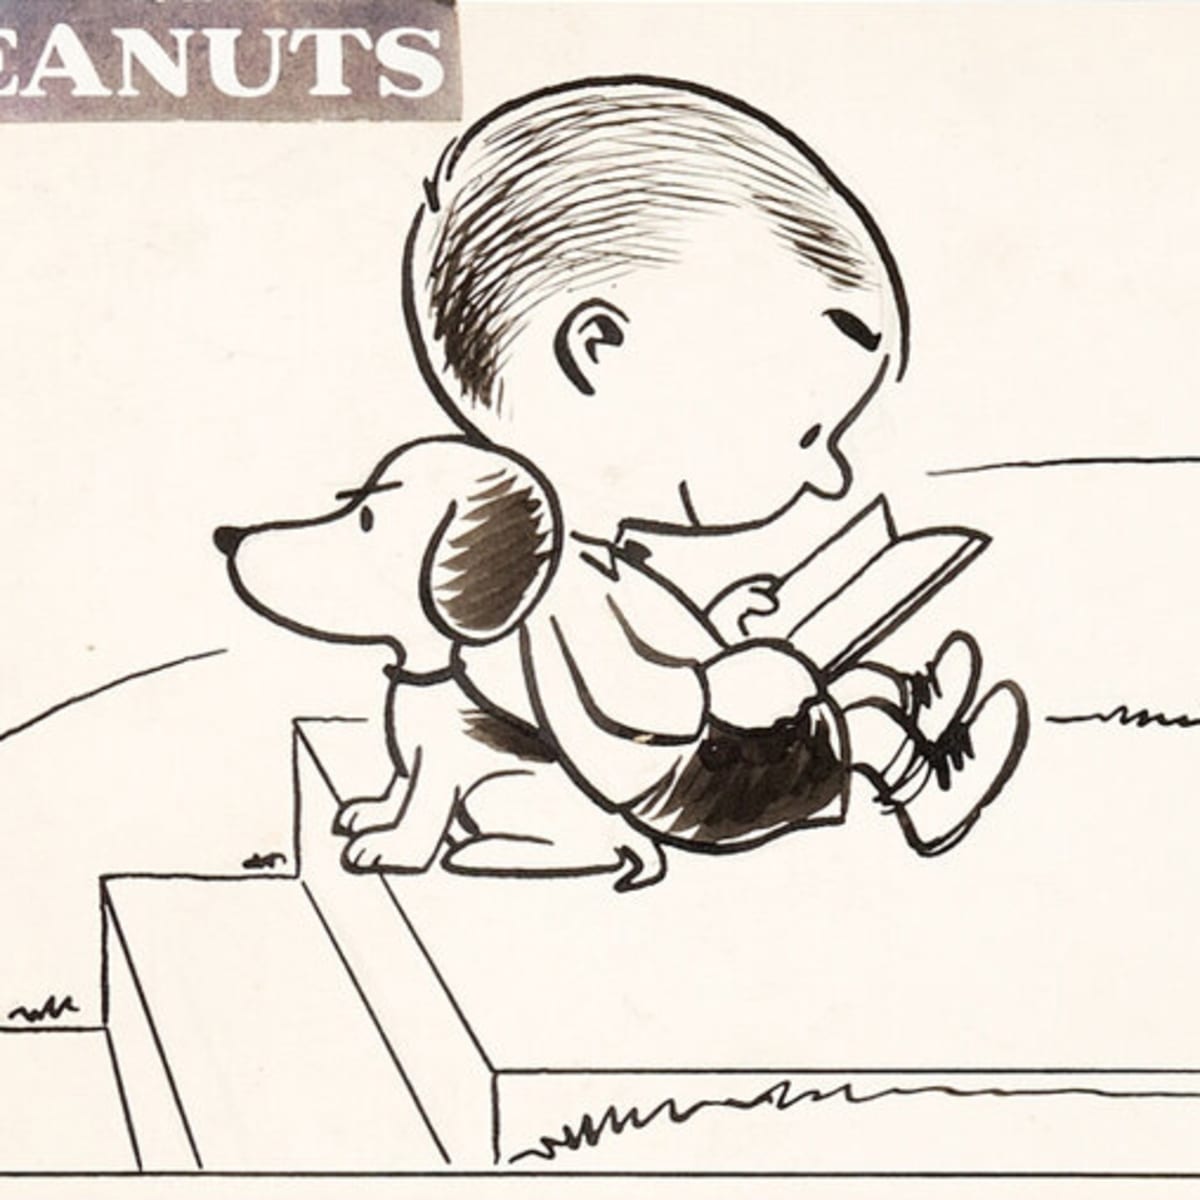 Early Snoopy comic strip fetches $192,000 - Antique Trader